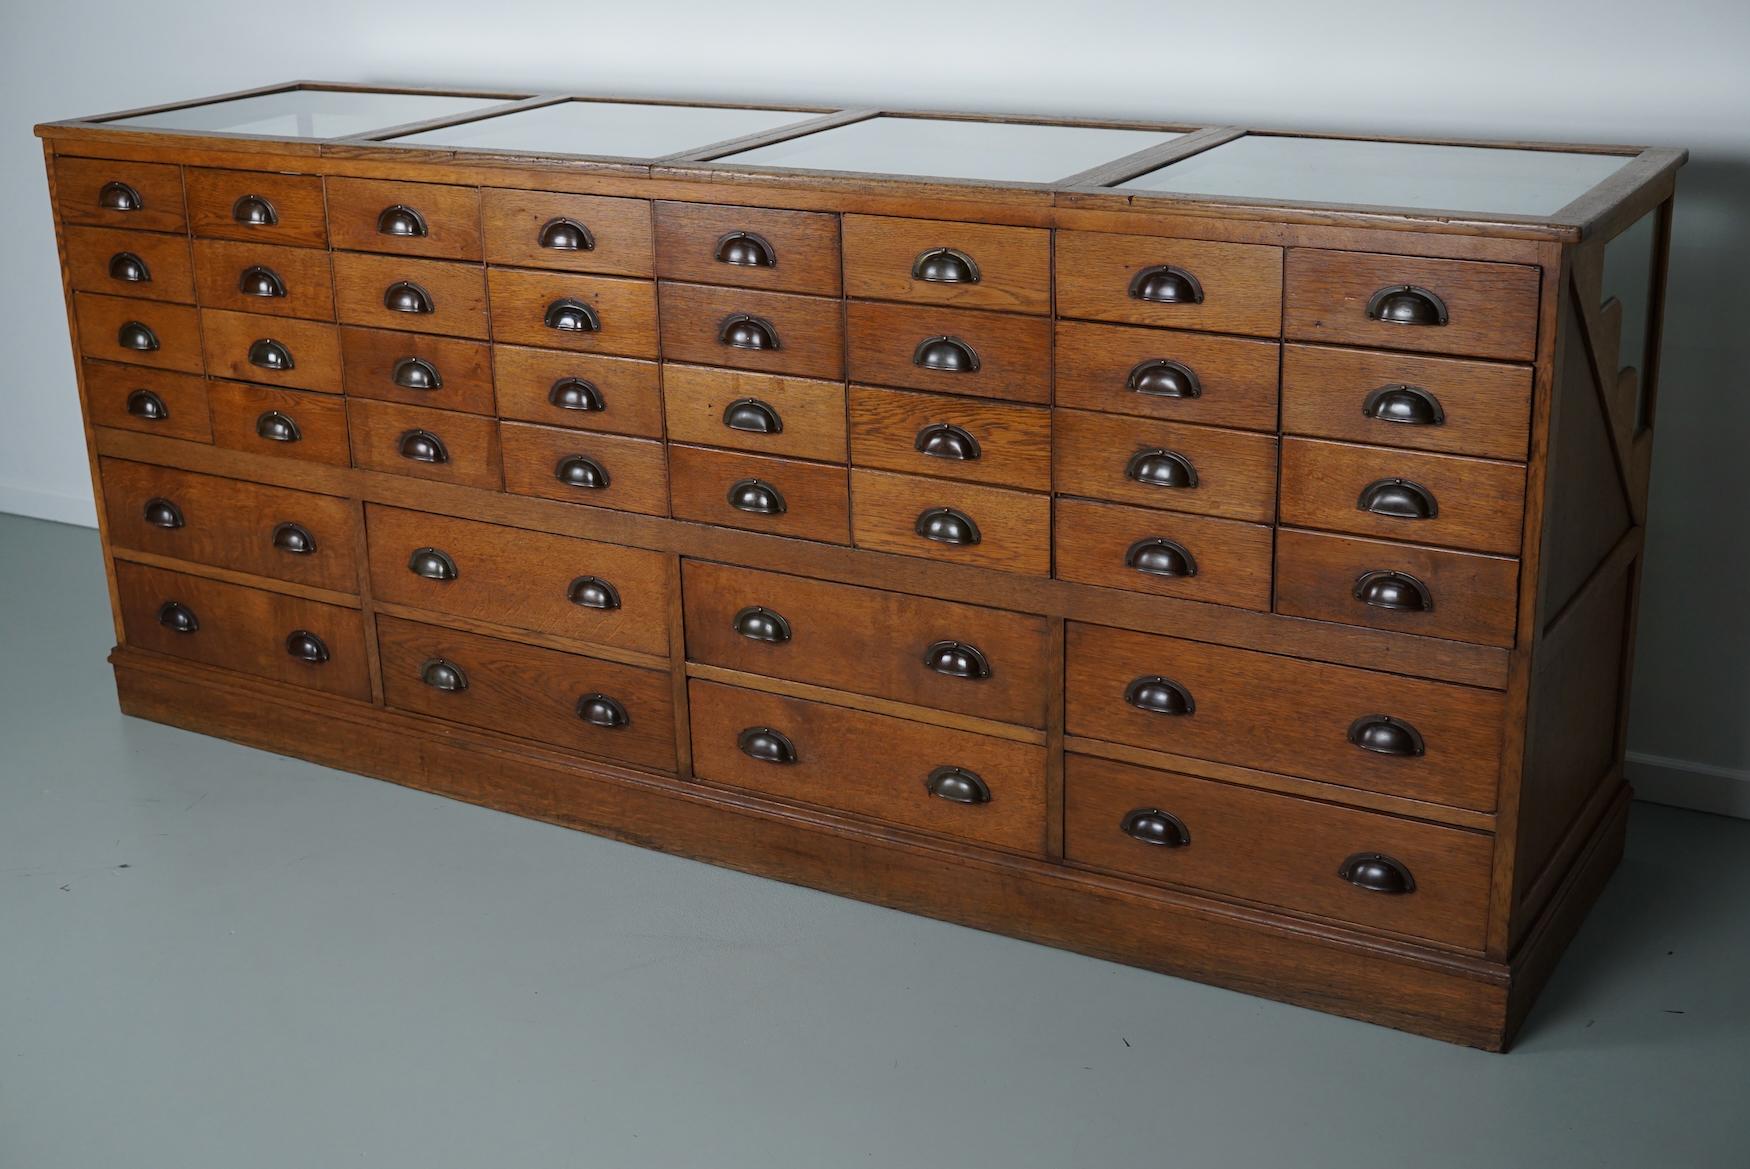 This oak art deco haberdashery shop counter dates from the 1920-1930s and was made in Amsterdam by Joh. Tacoma. It features a solid wooden frame, a glass casing with folding doors in the top and many drawers in oak with bronze handles.